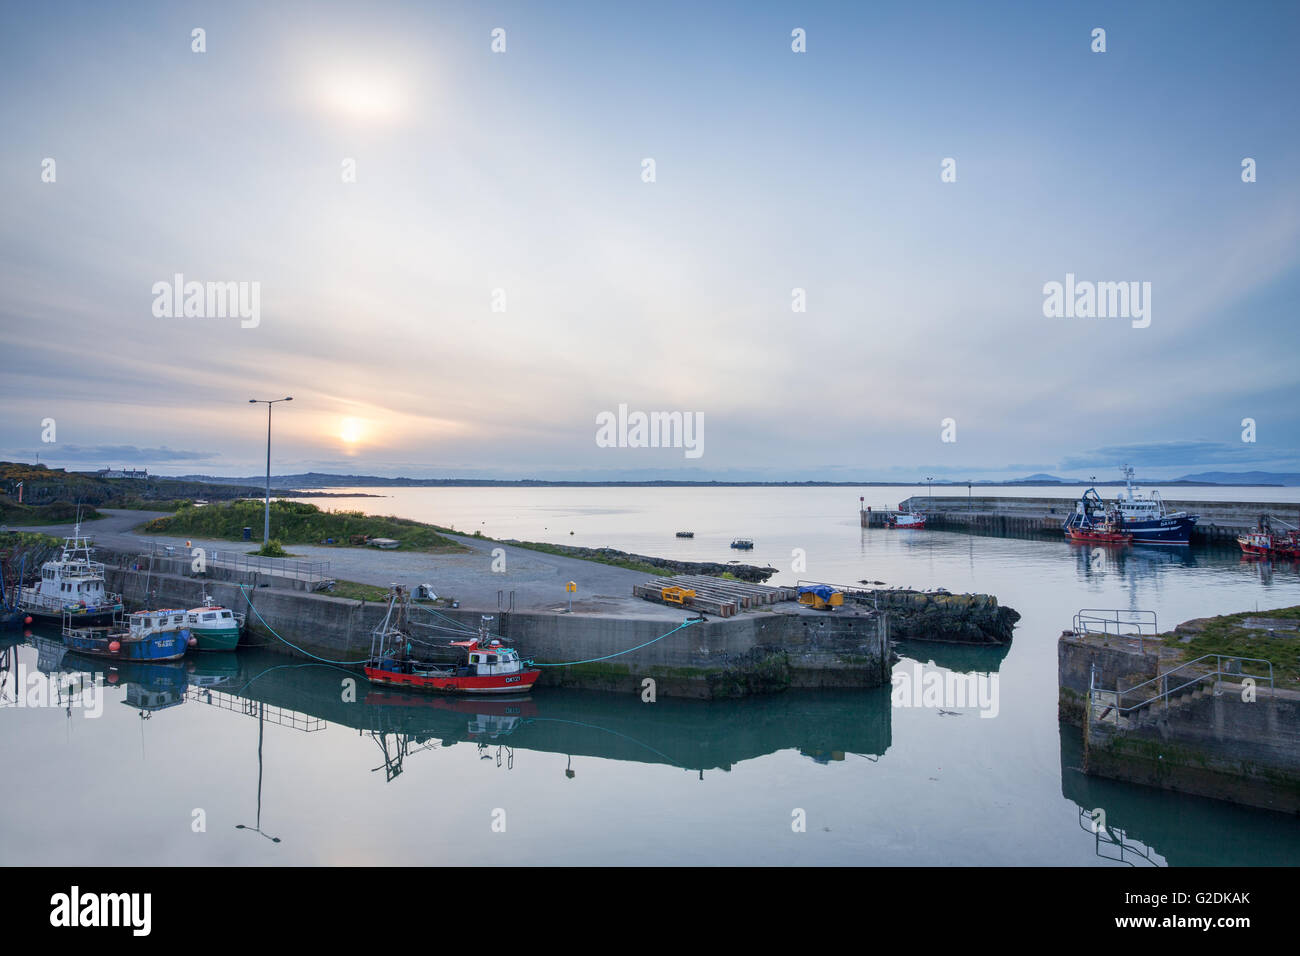 The Fishing Harbour at Clogherhead County Louth Ireland at sunset Stock Photo